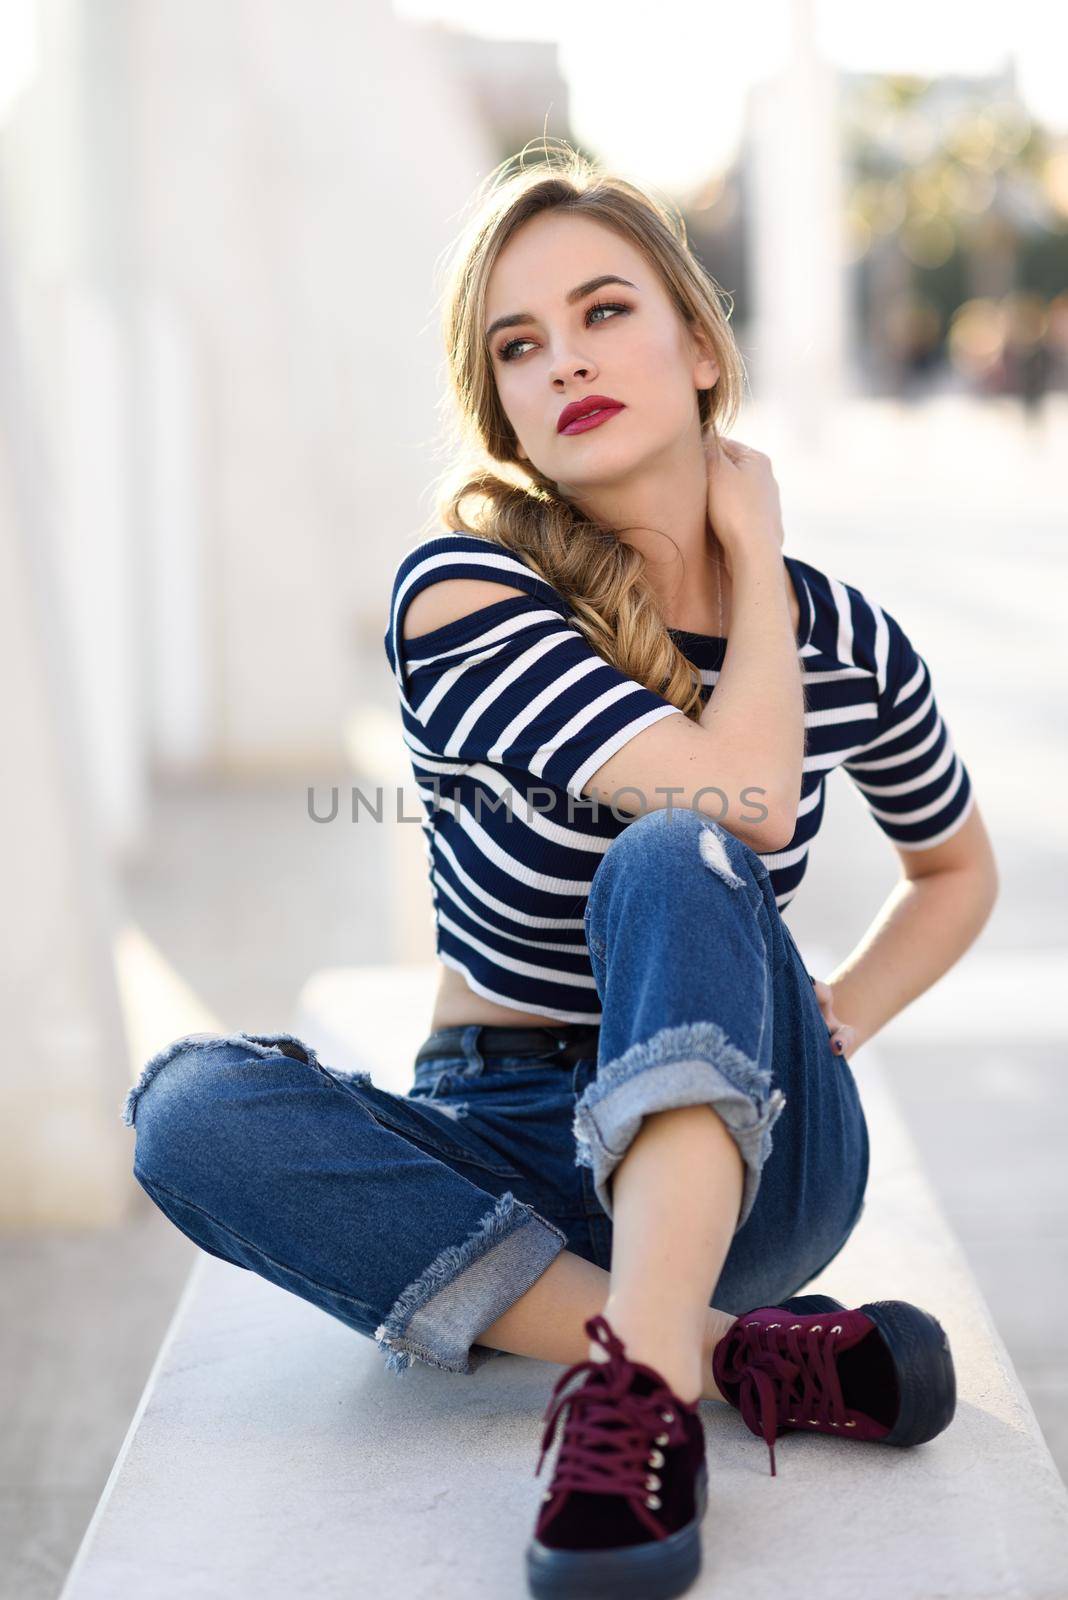 Blonde woman, model of fashion, sitting in urban background. by javiindy